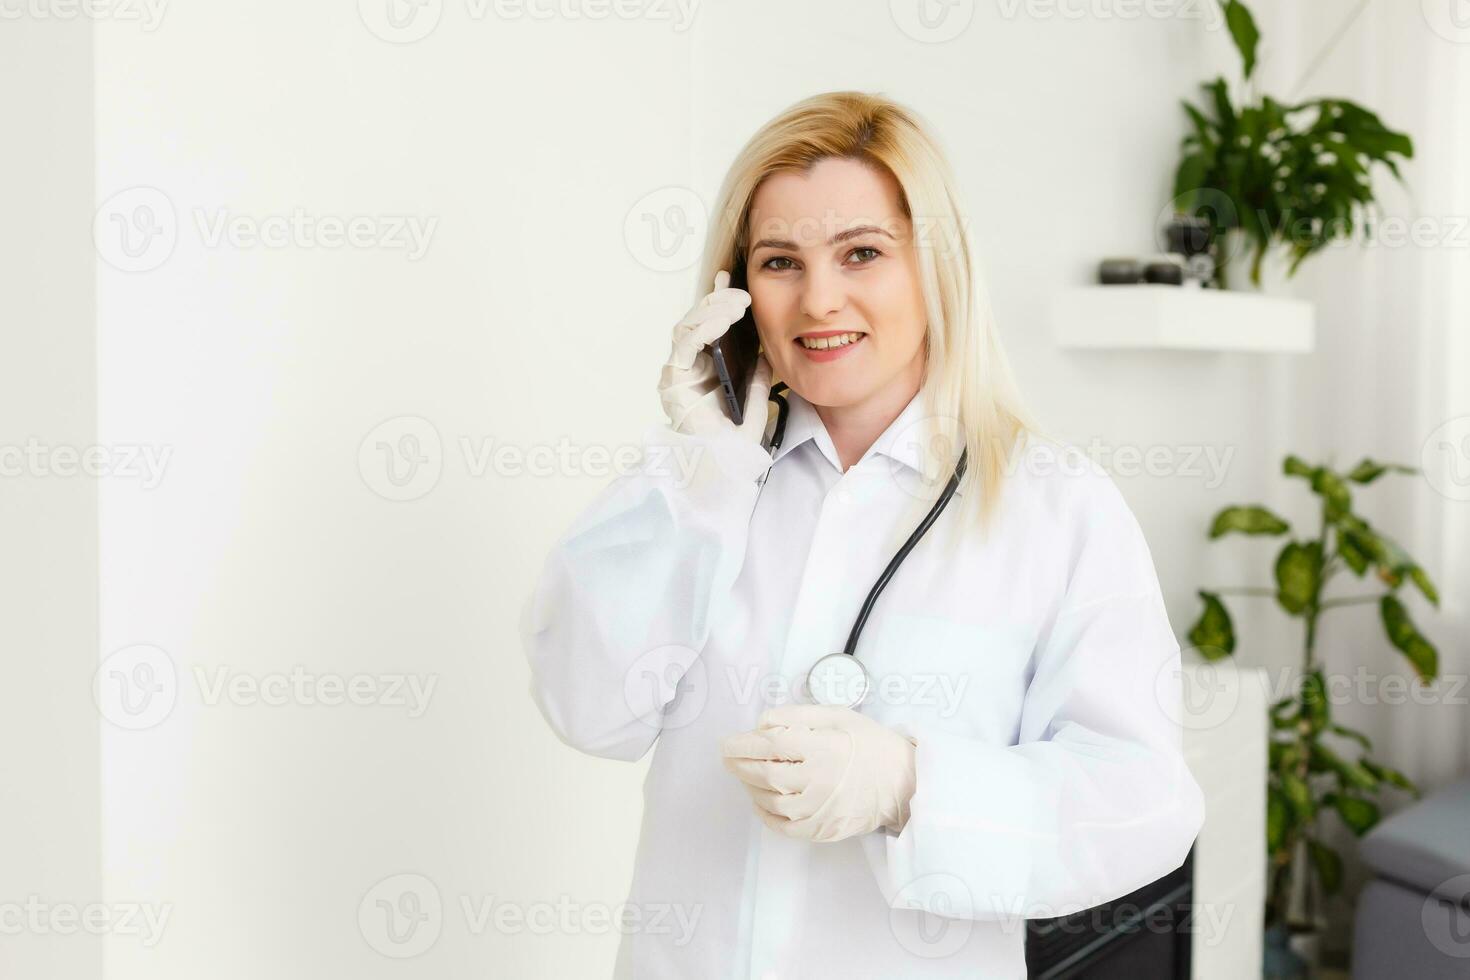 Side profile portrait smiling female doctor, healthcare professional in white lab coat with stethoscope, analyzing data results on mobile smart phone standing in hospital hallway corridor photo